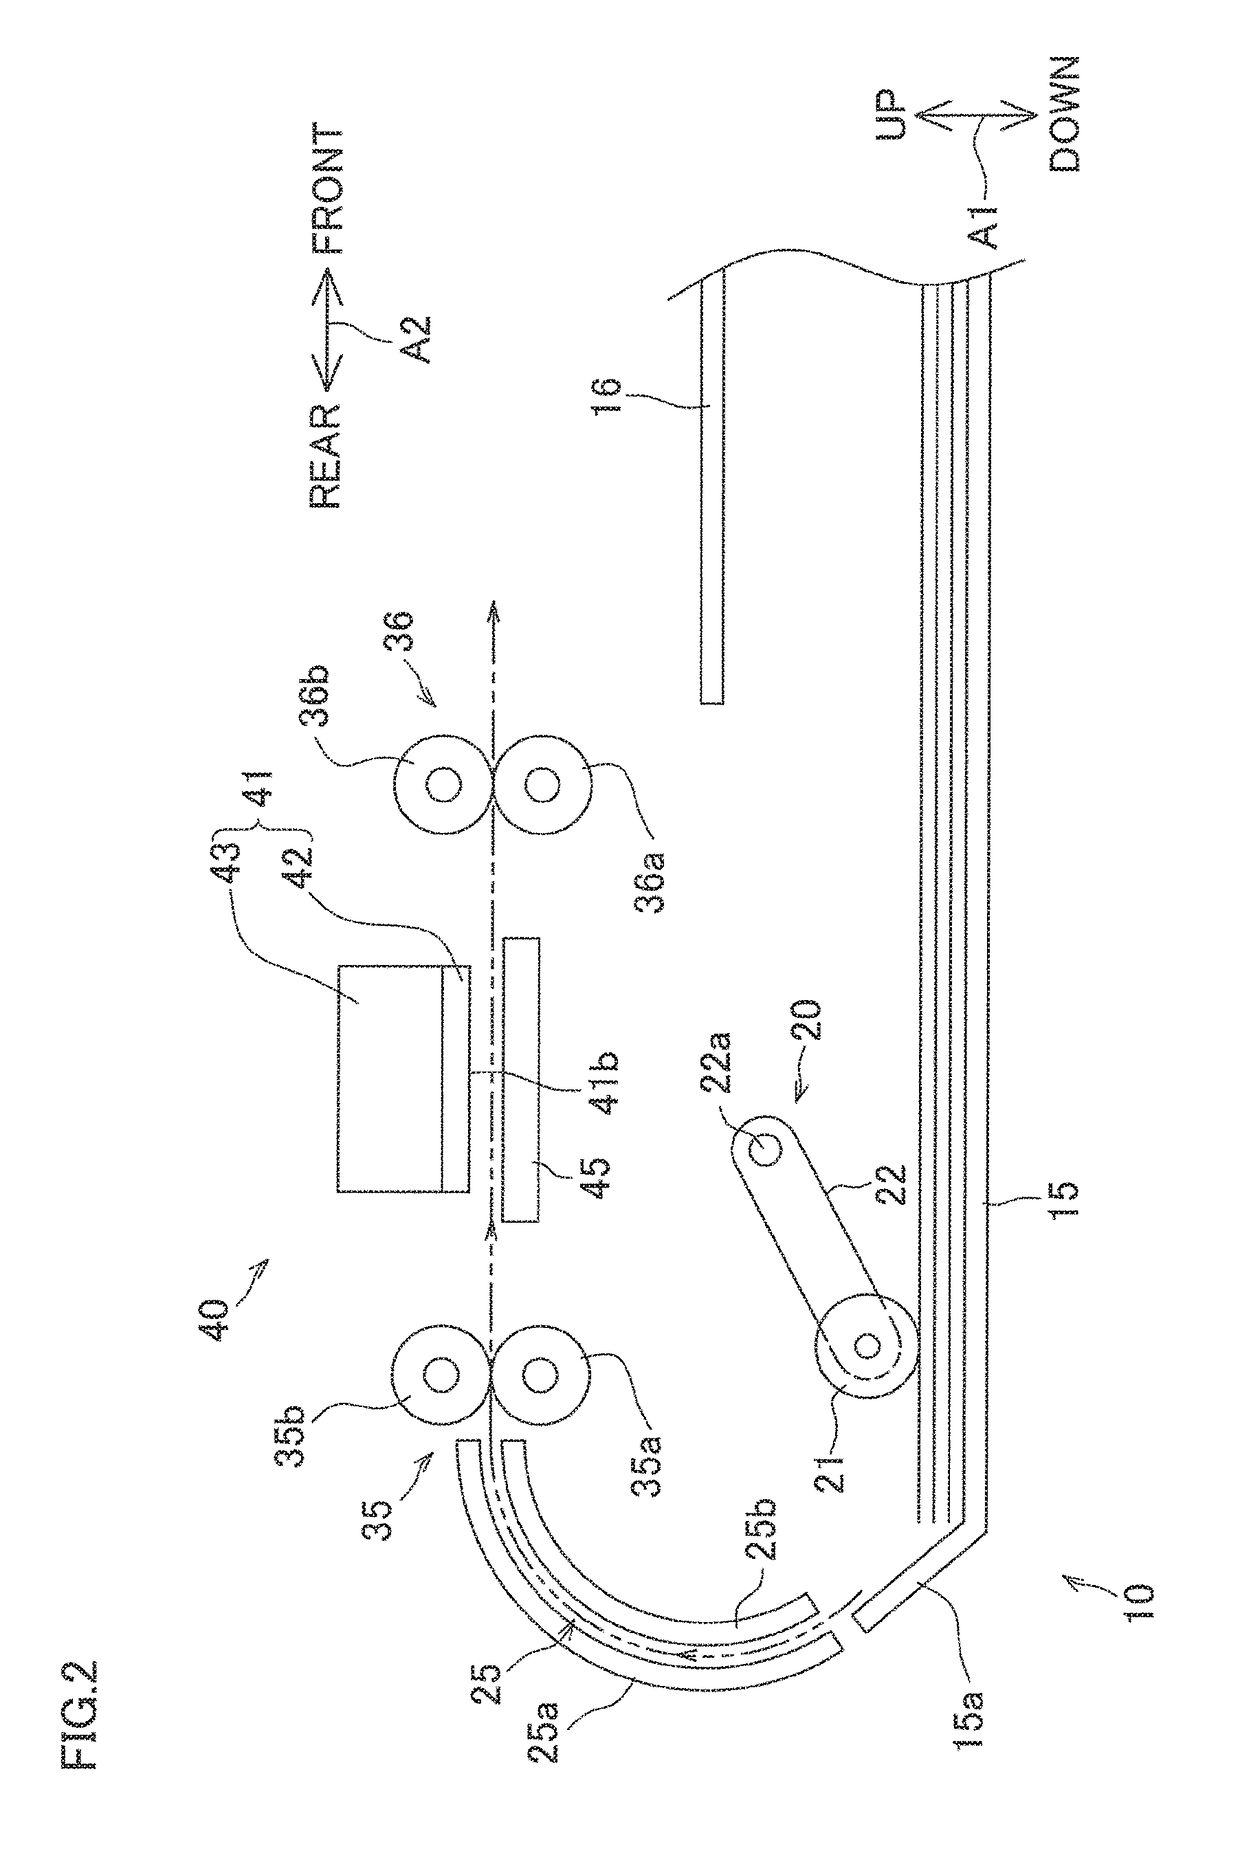 Liquid ejection apparatus having wiper for wiping ejection surface